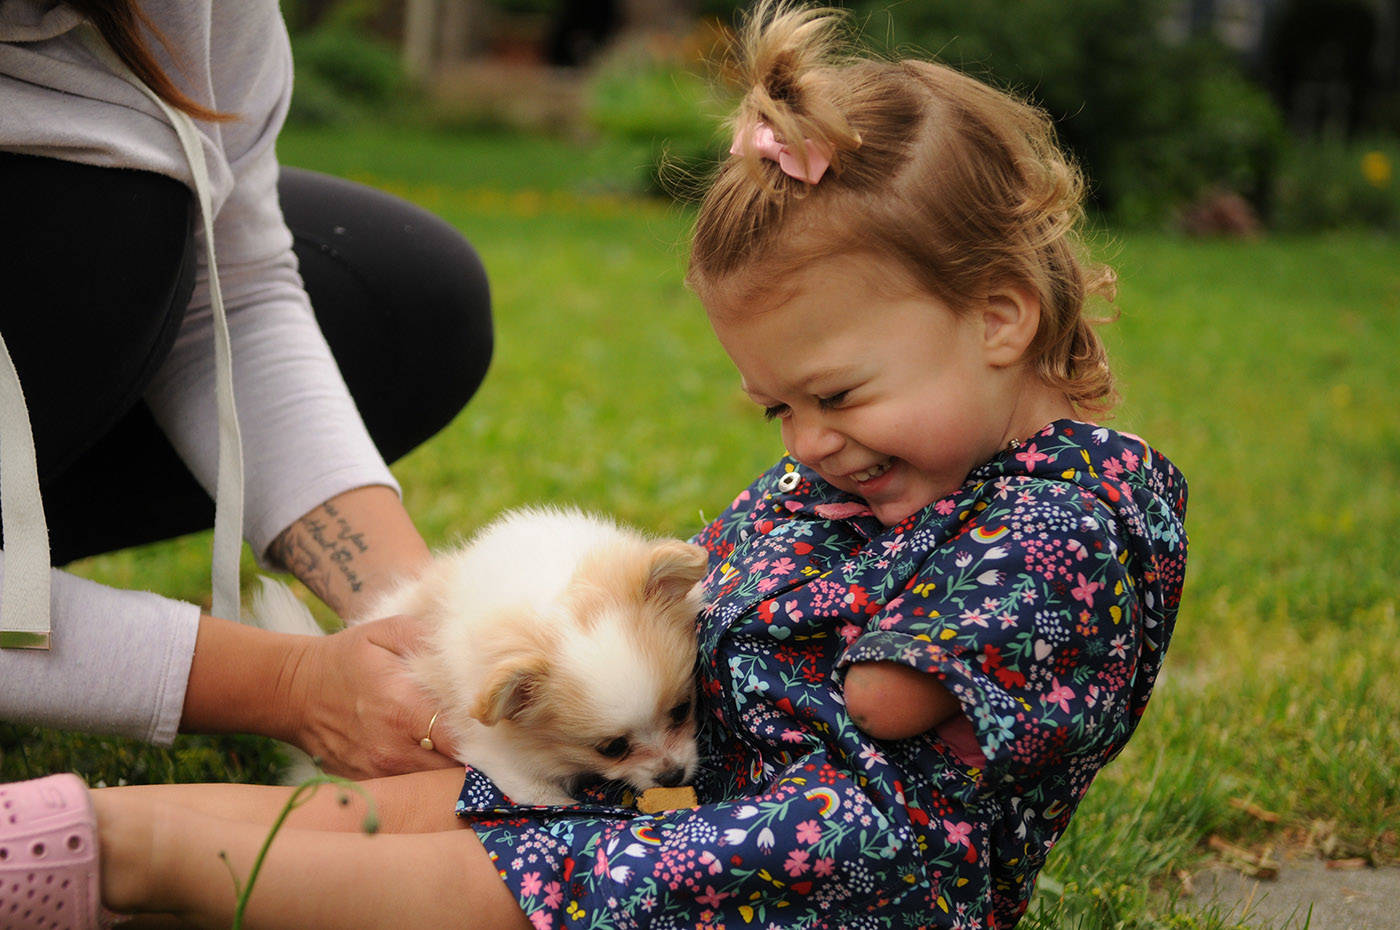 Two-year-old Ivy McLeod laughs while playing with Lucky the puppy outside their Chilliwack home on Thursday, June 10, 2021. (Jenna Hauck/ Chilliwack Progress)